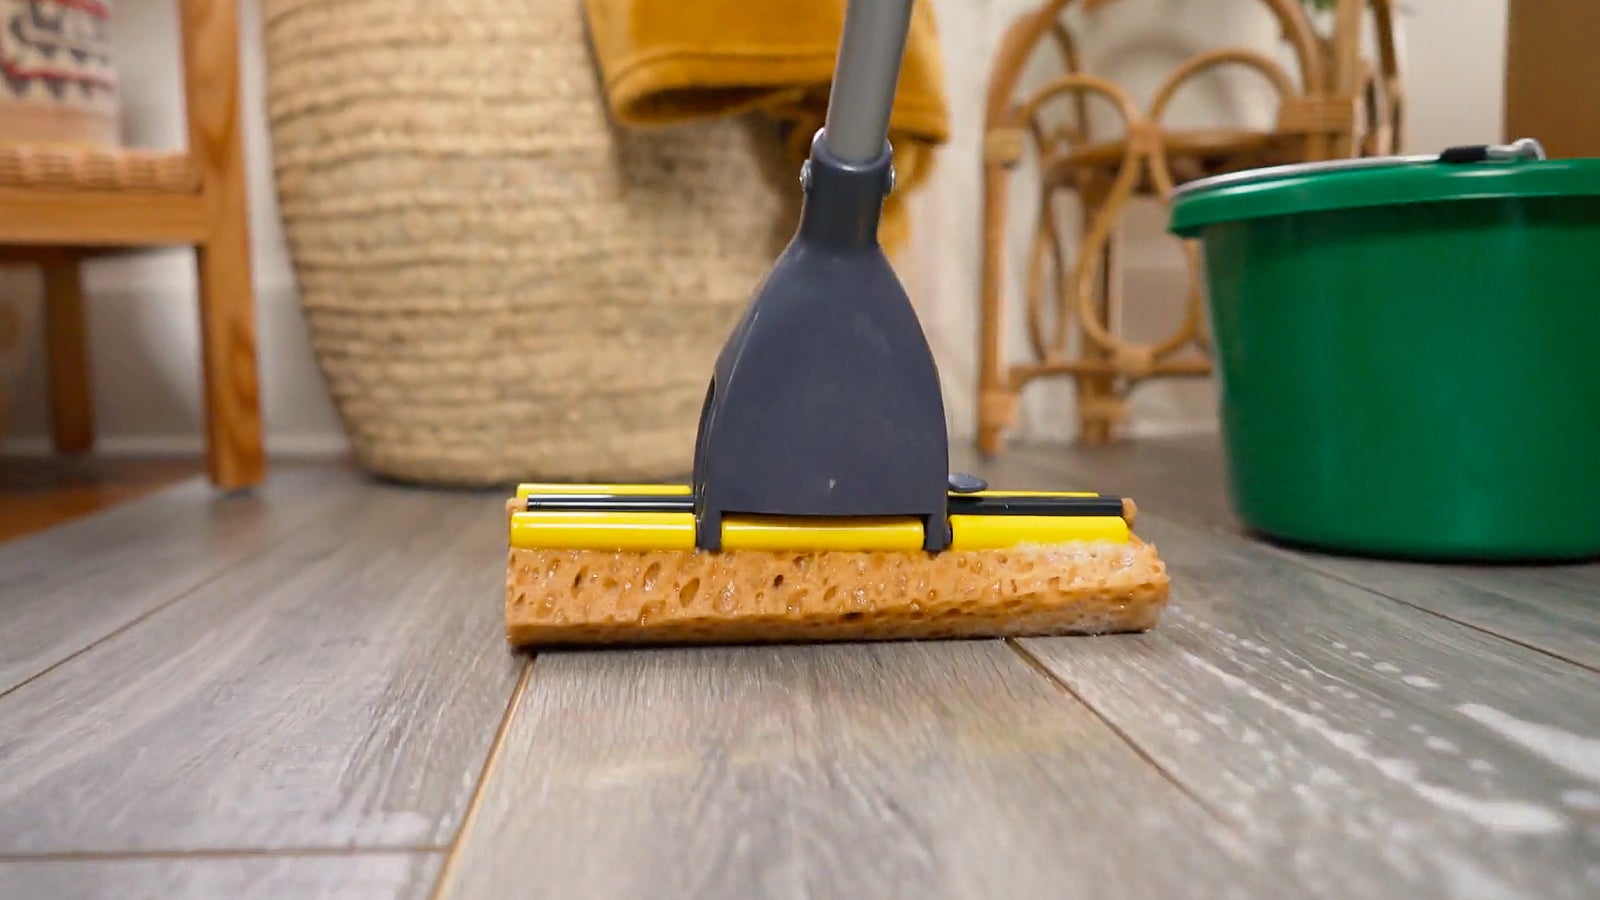 How To Clean Mop Laminate Floors Without Leaving Pine Sol